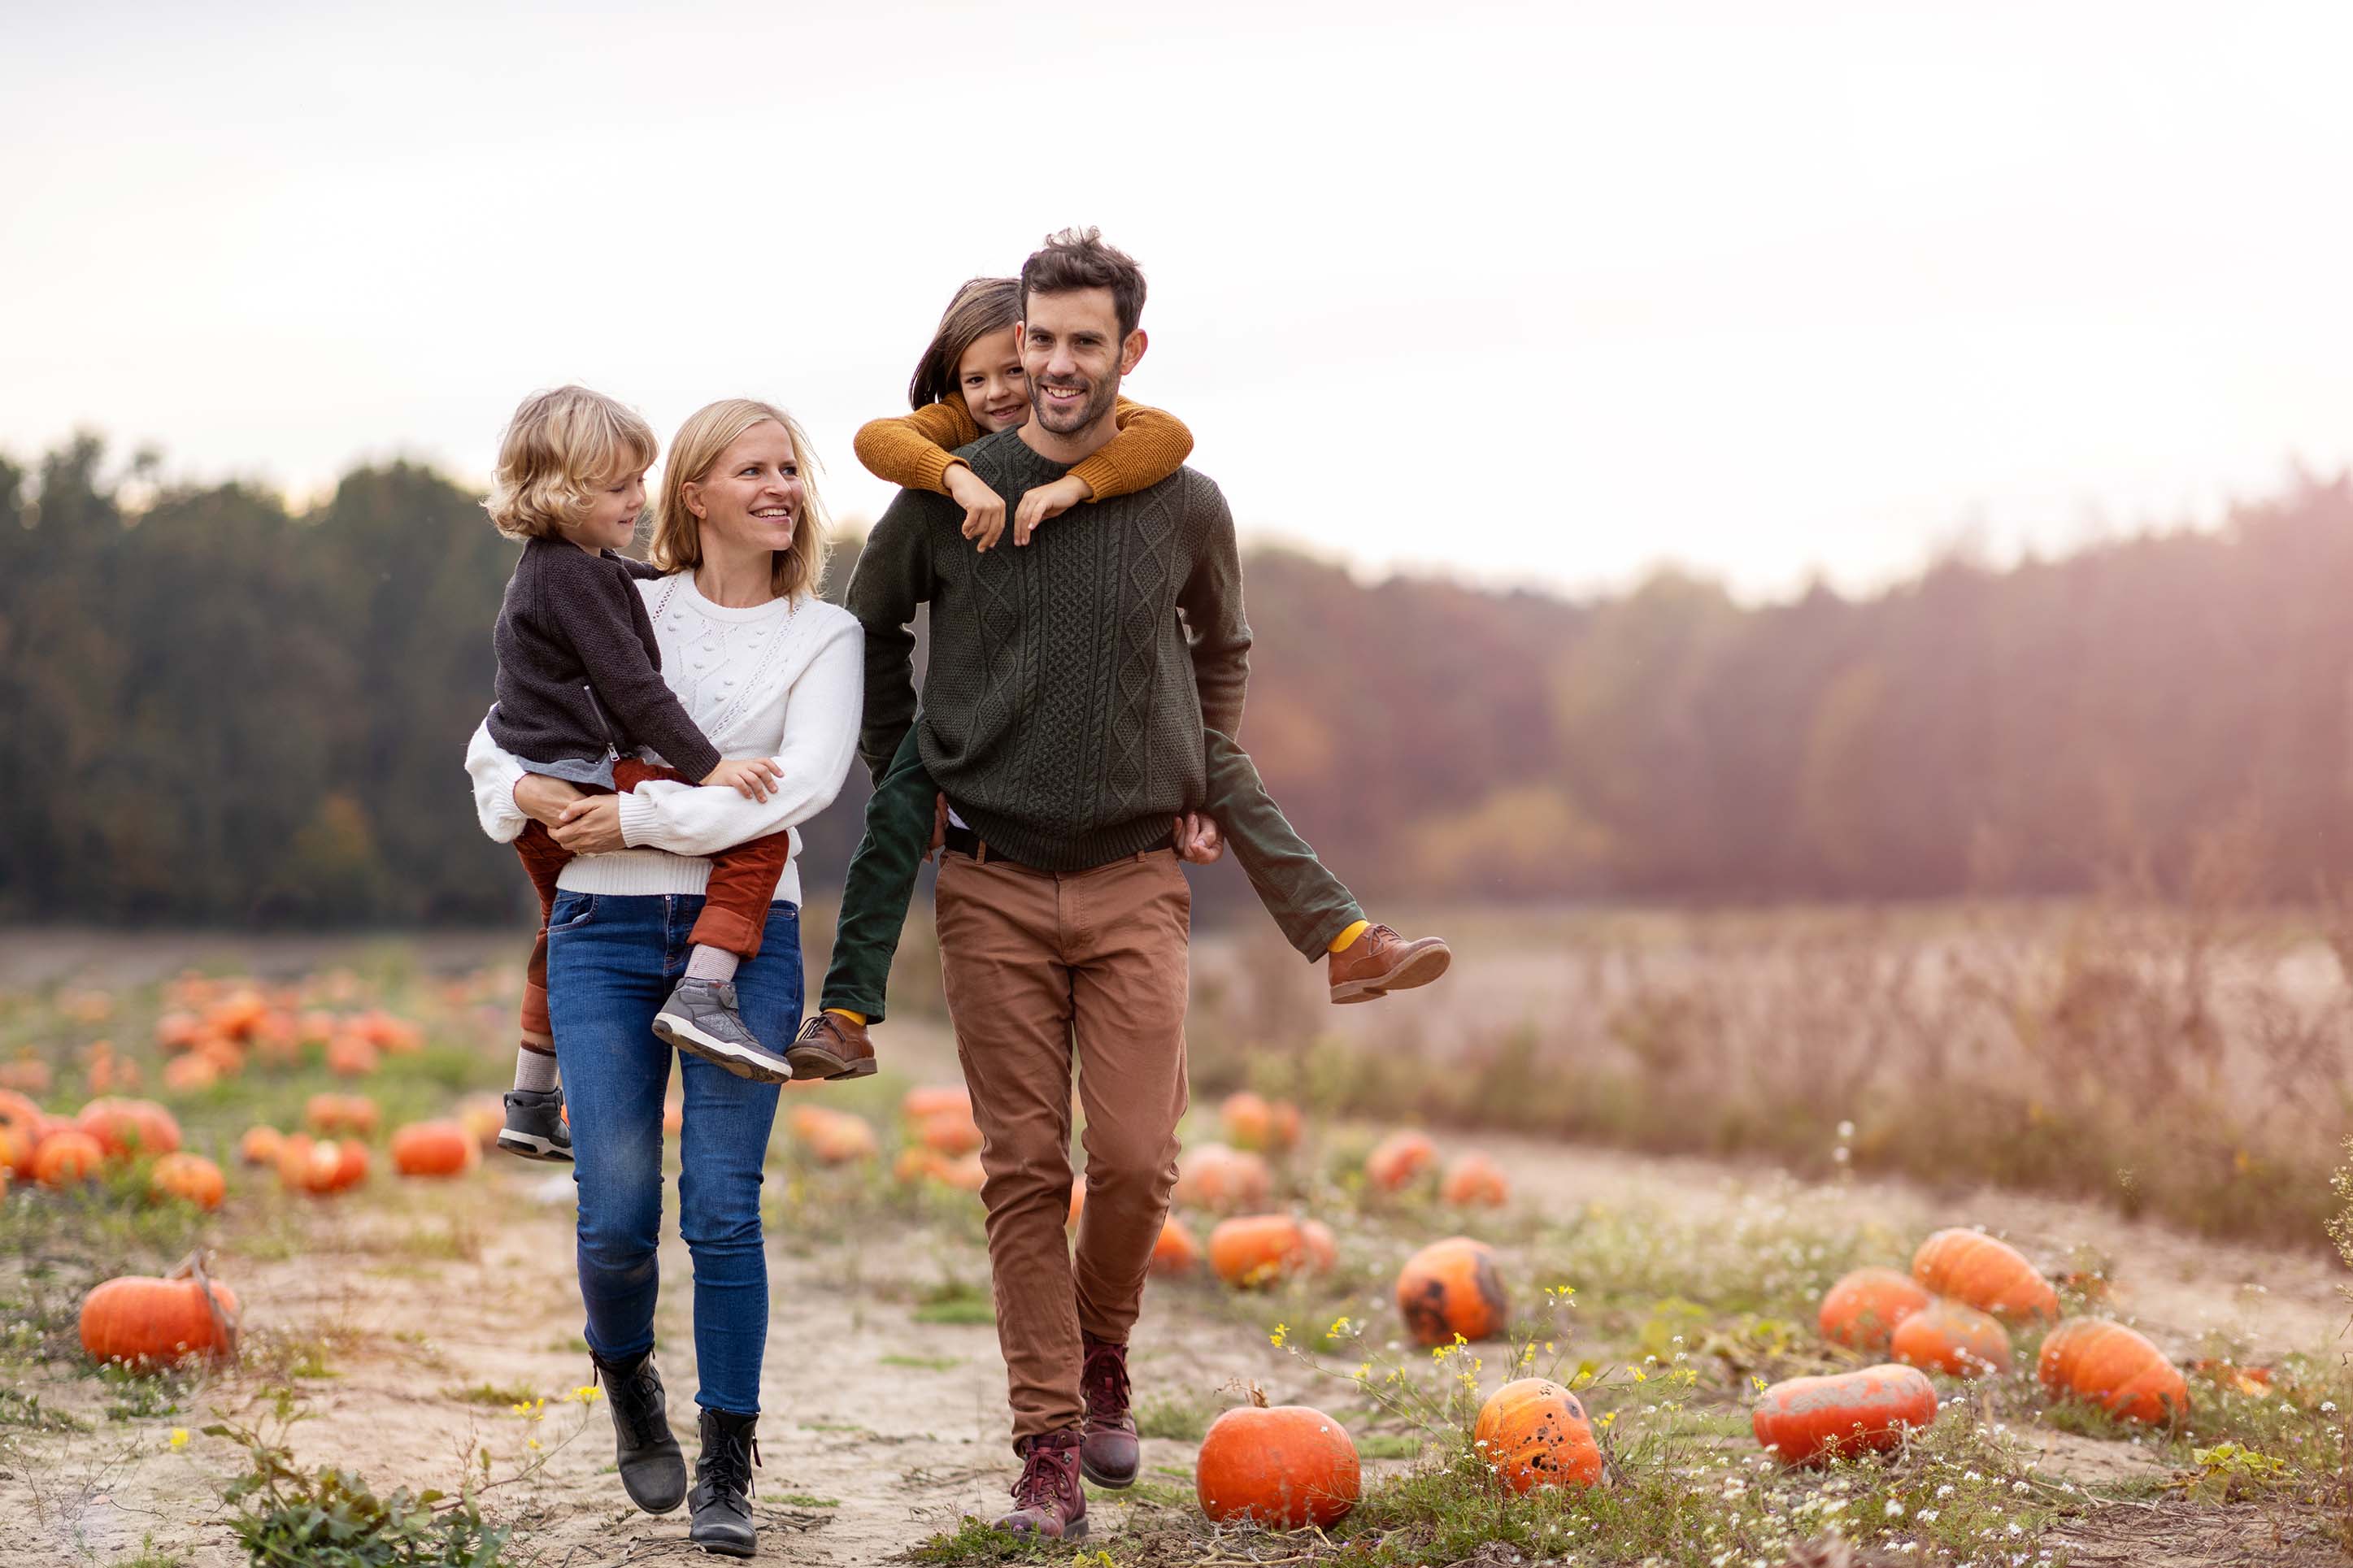 family walking through a pumpkin patch together